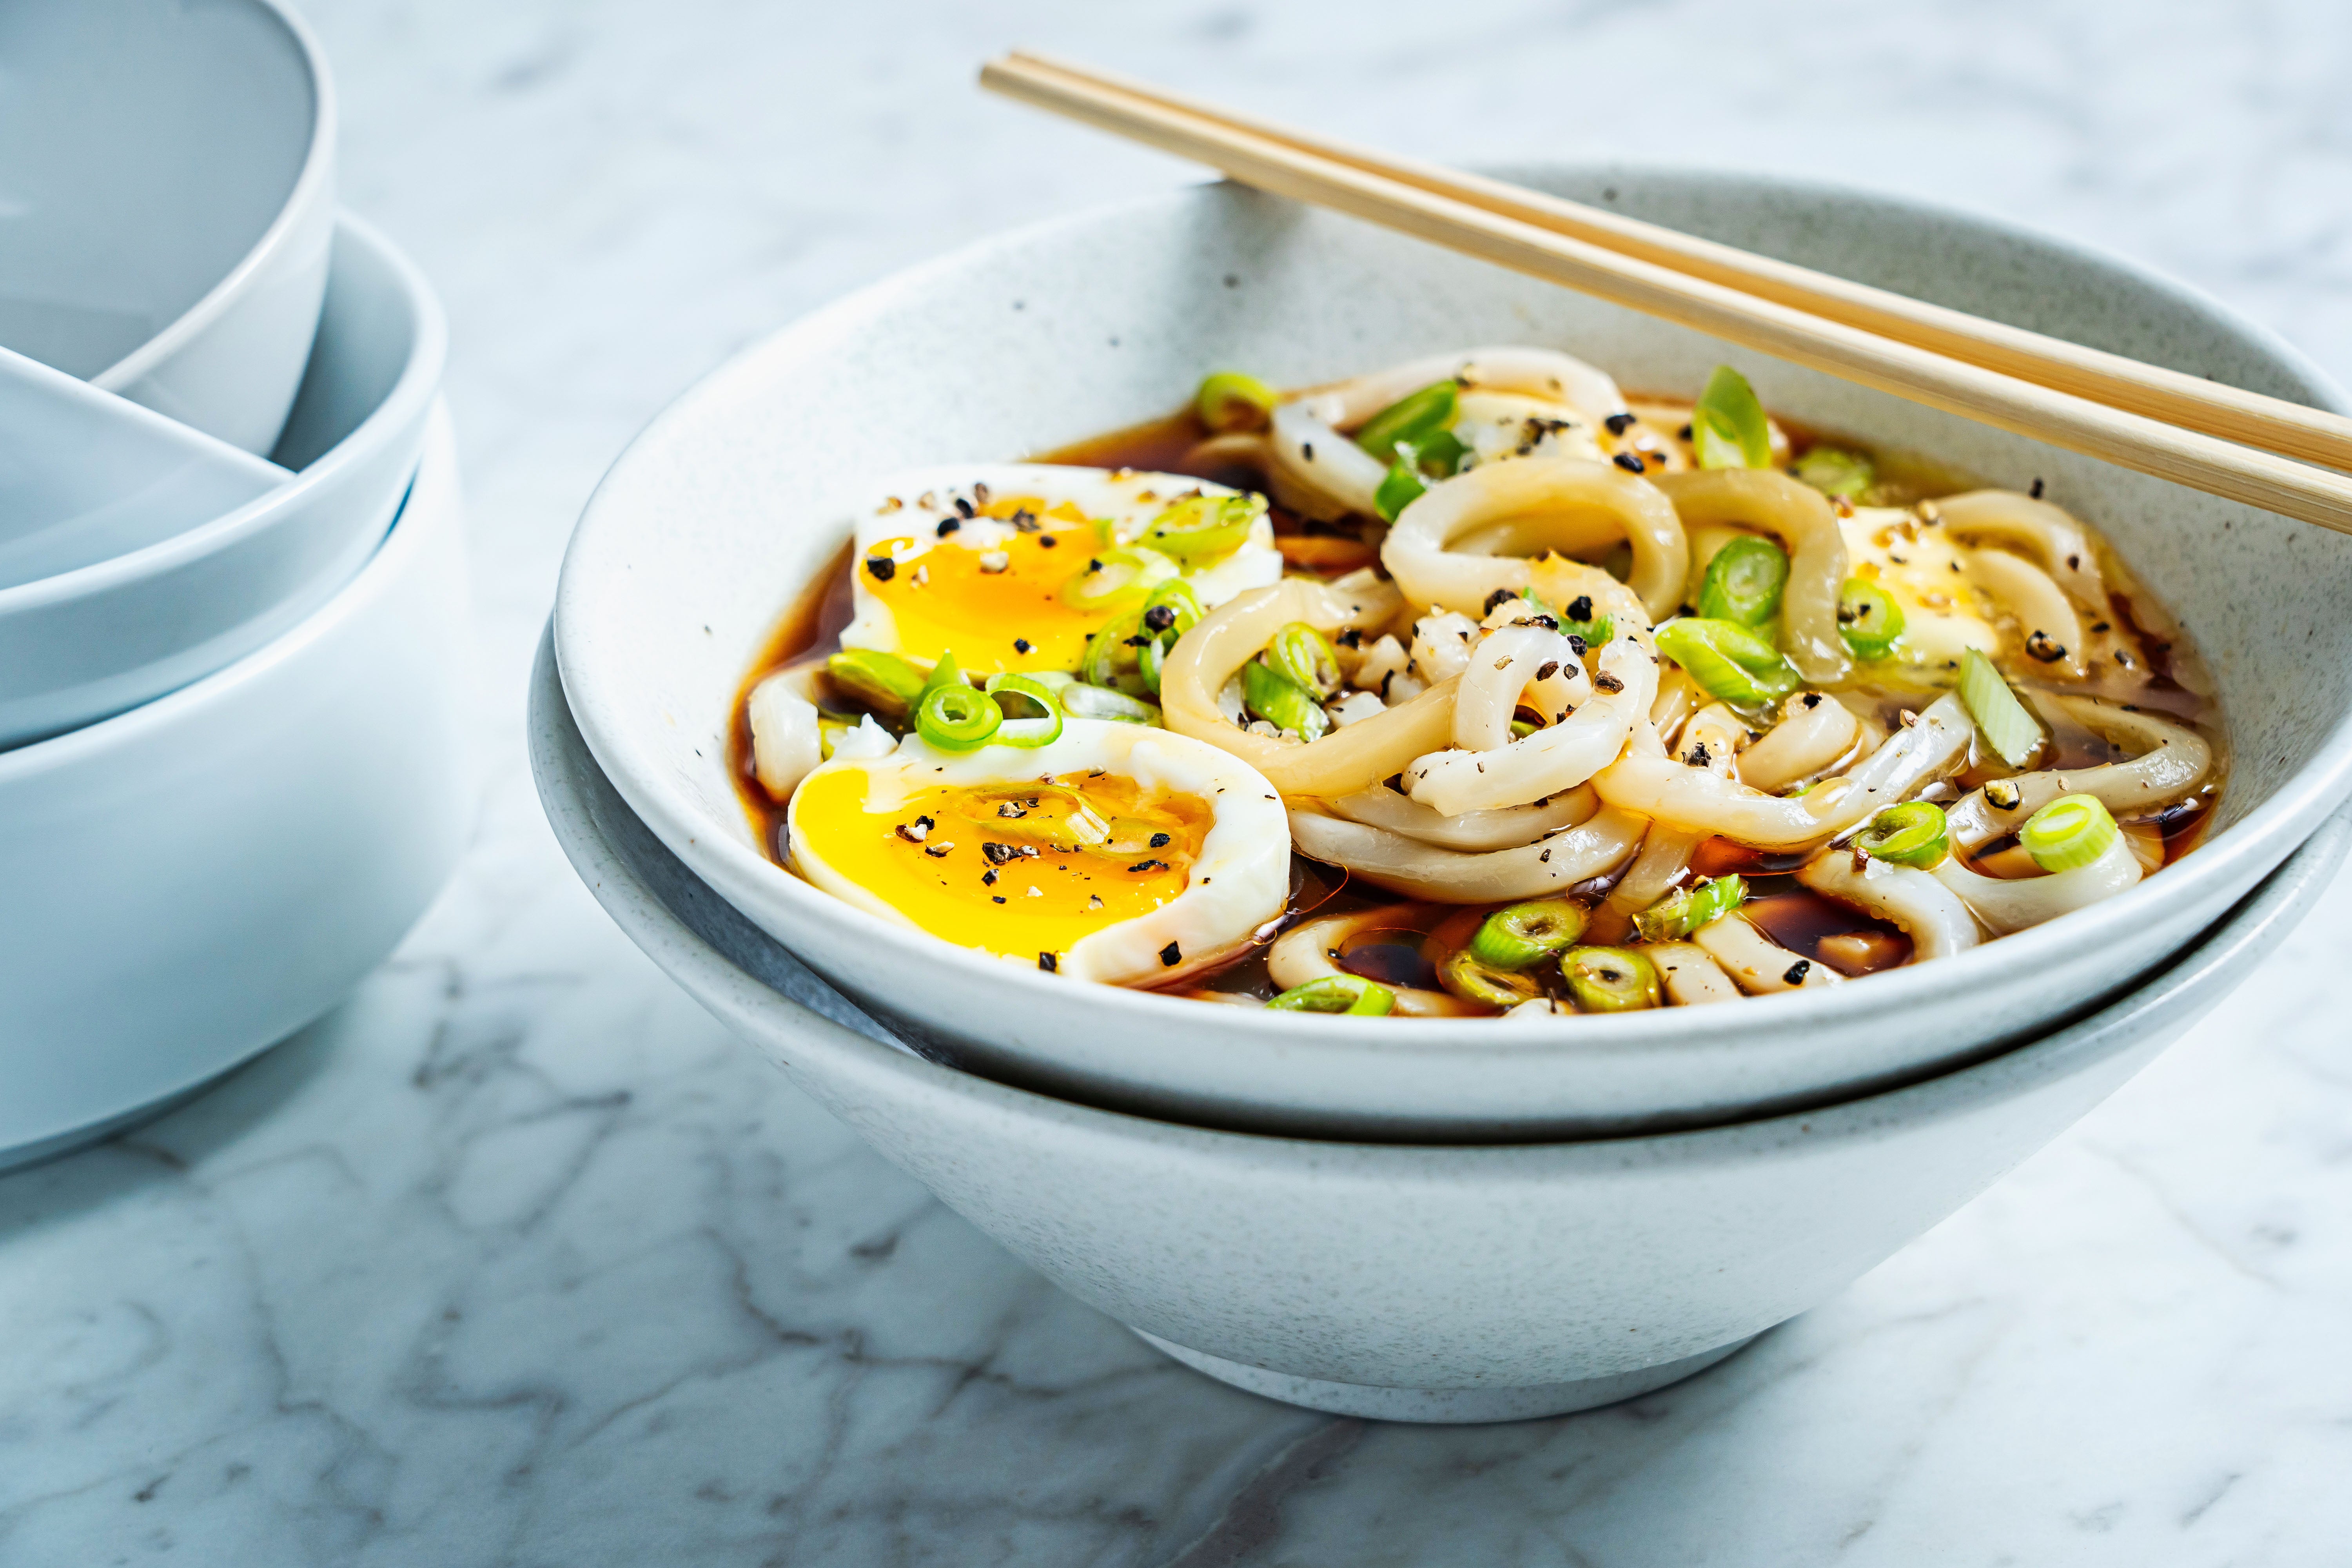 Buying fresh udon noodles will give this dish its crave-worthy appeal